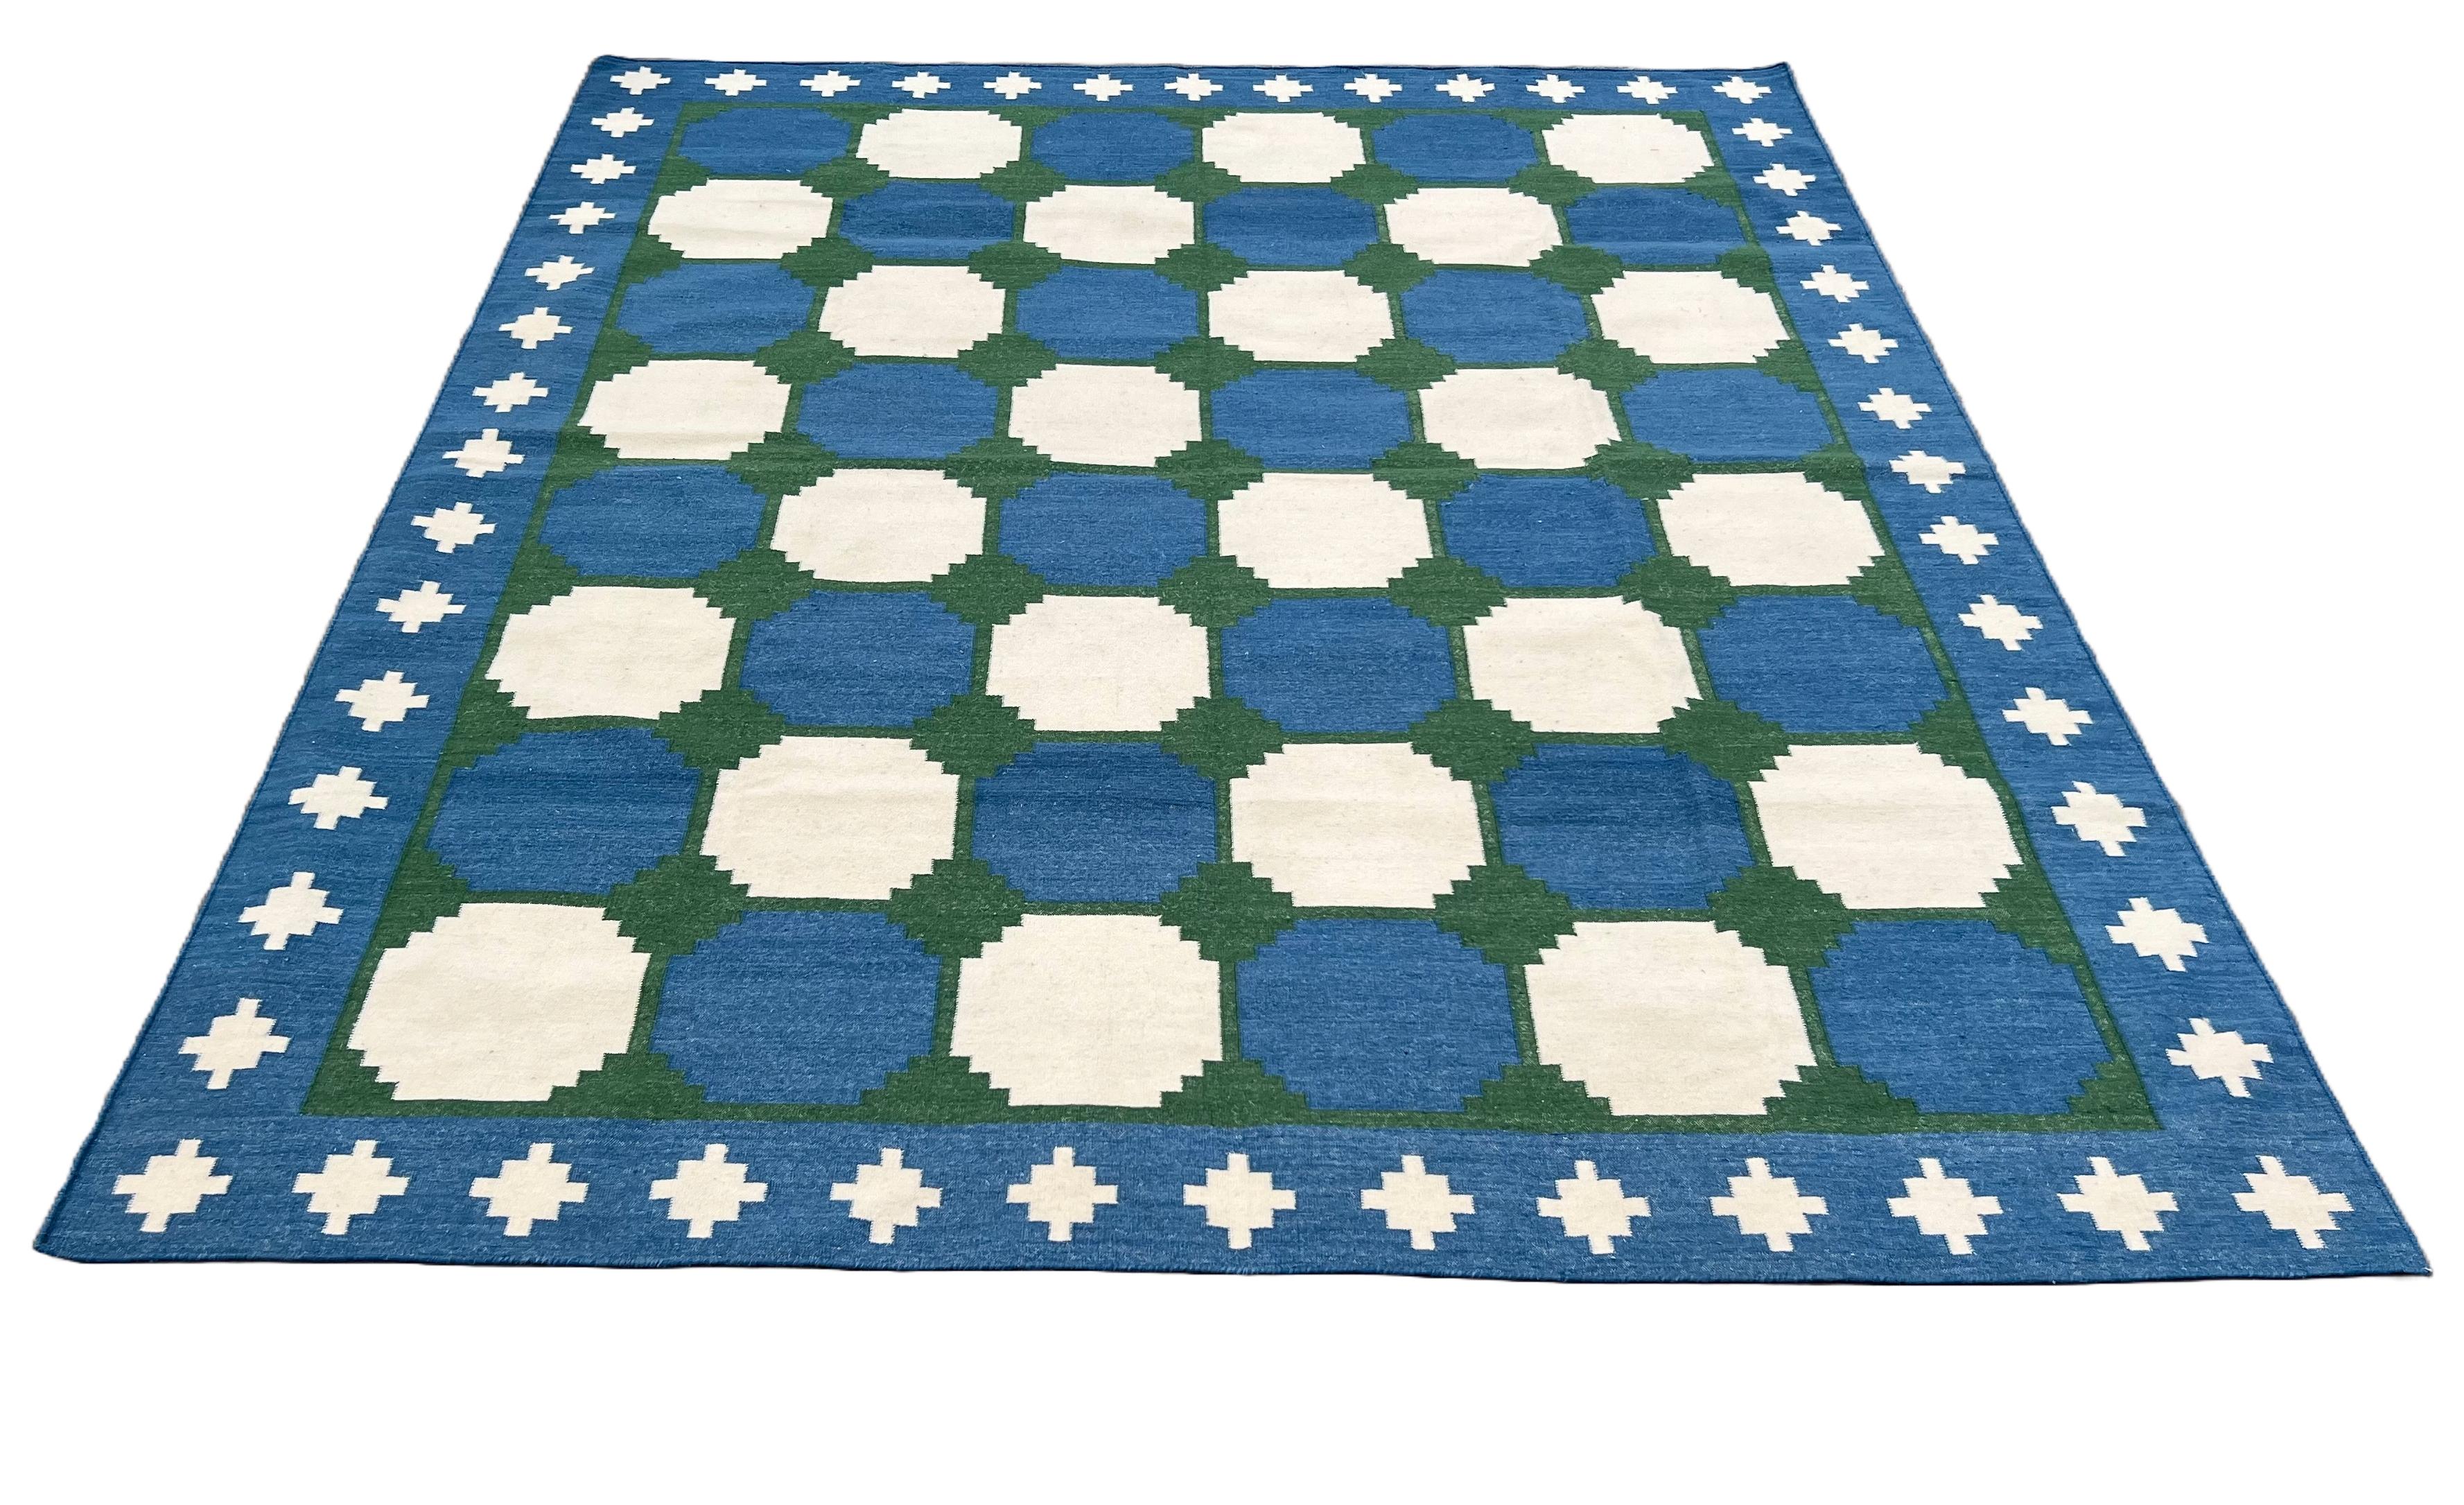 Contemporary Handmade Woolen Area Flat Weave Rug, 8x10 Blue And Green Tile Patterned Dhurrie For Sale